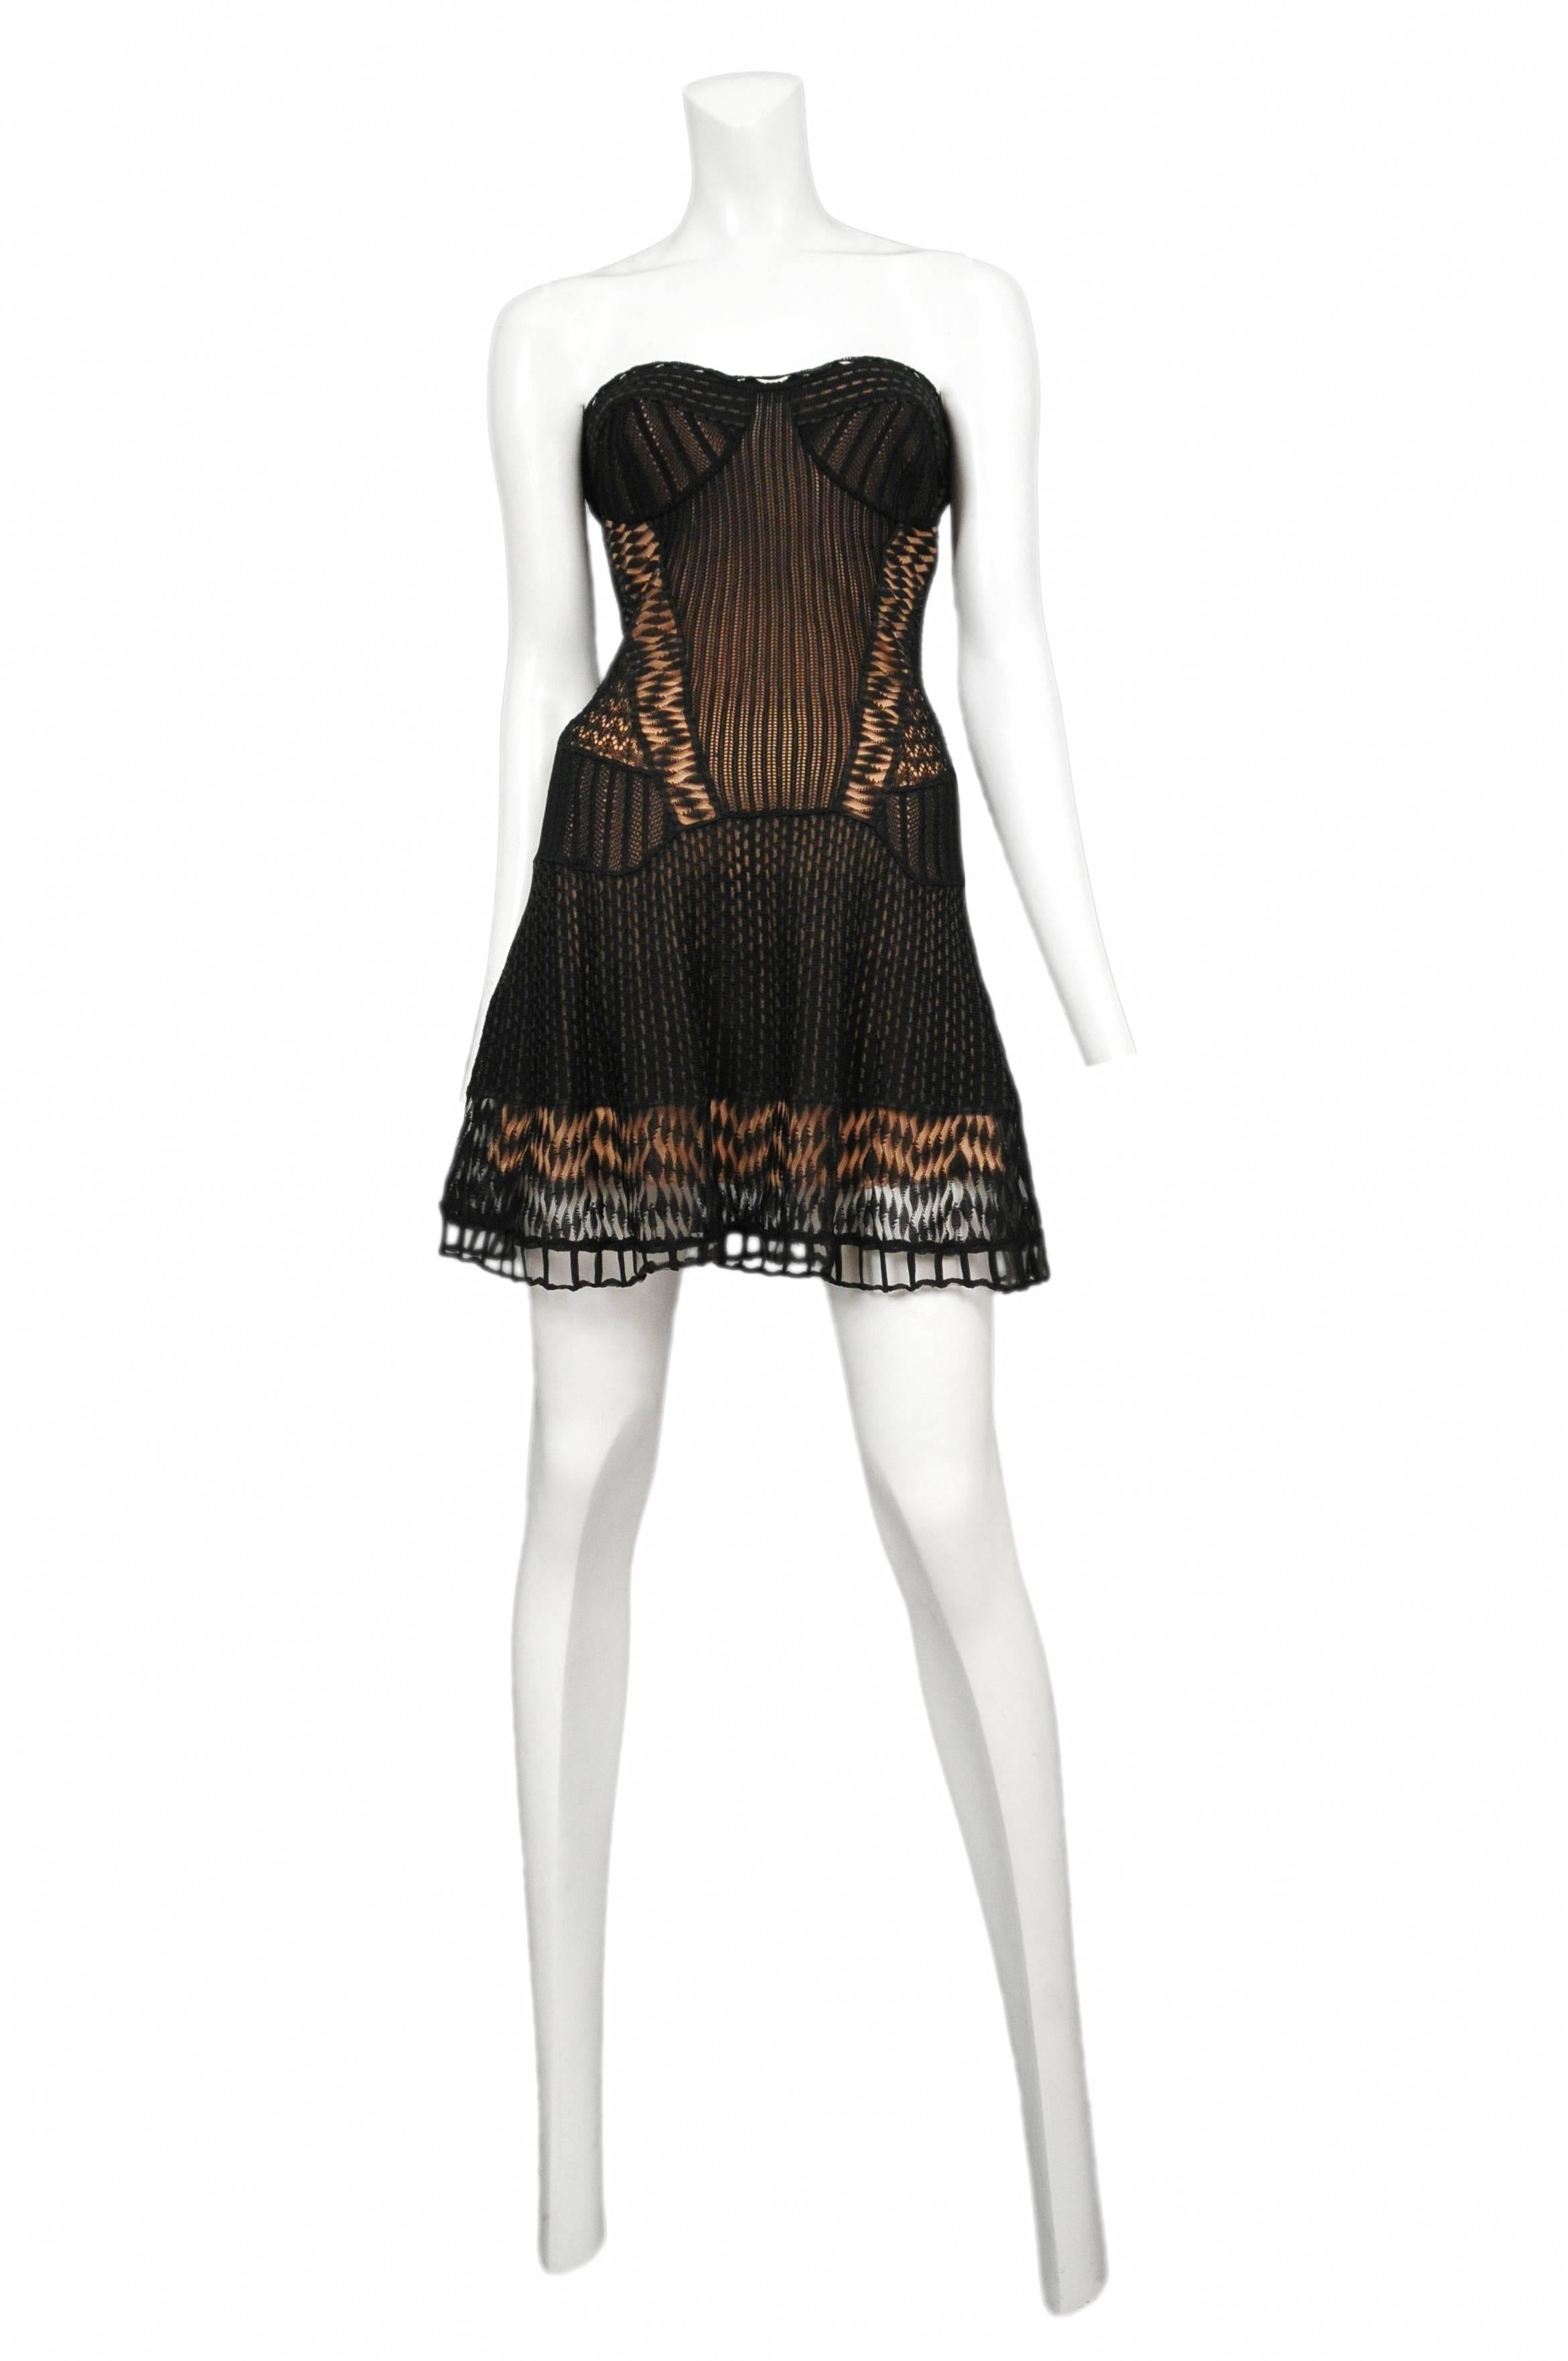 John Galliano for Christian Dior black crochet lace strapless dress with nude underlay. 